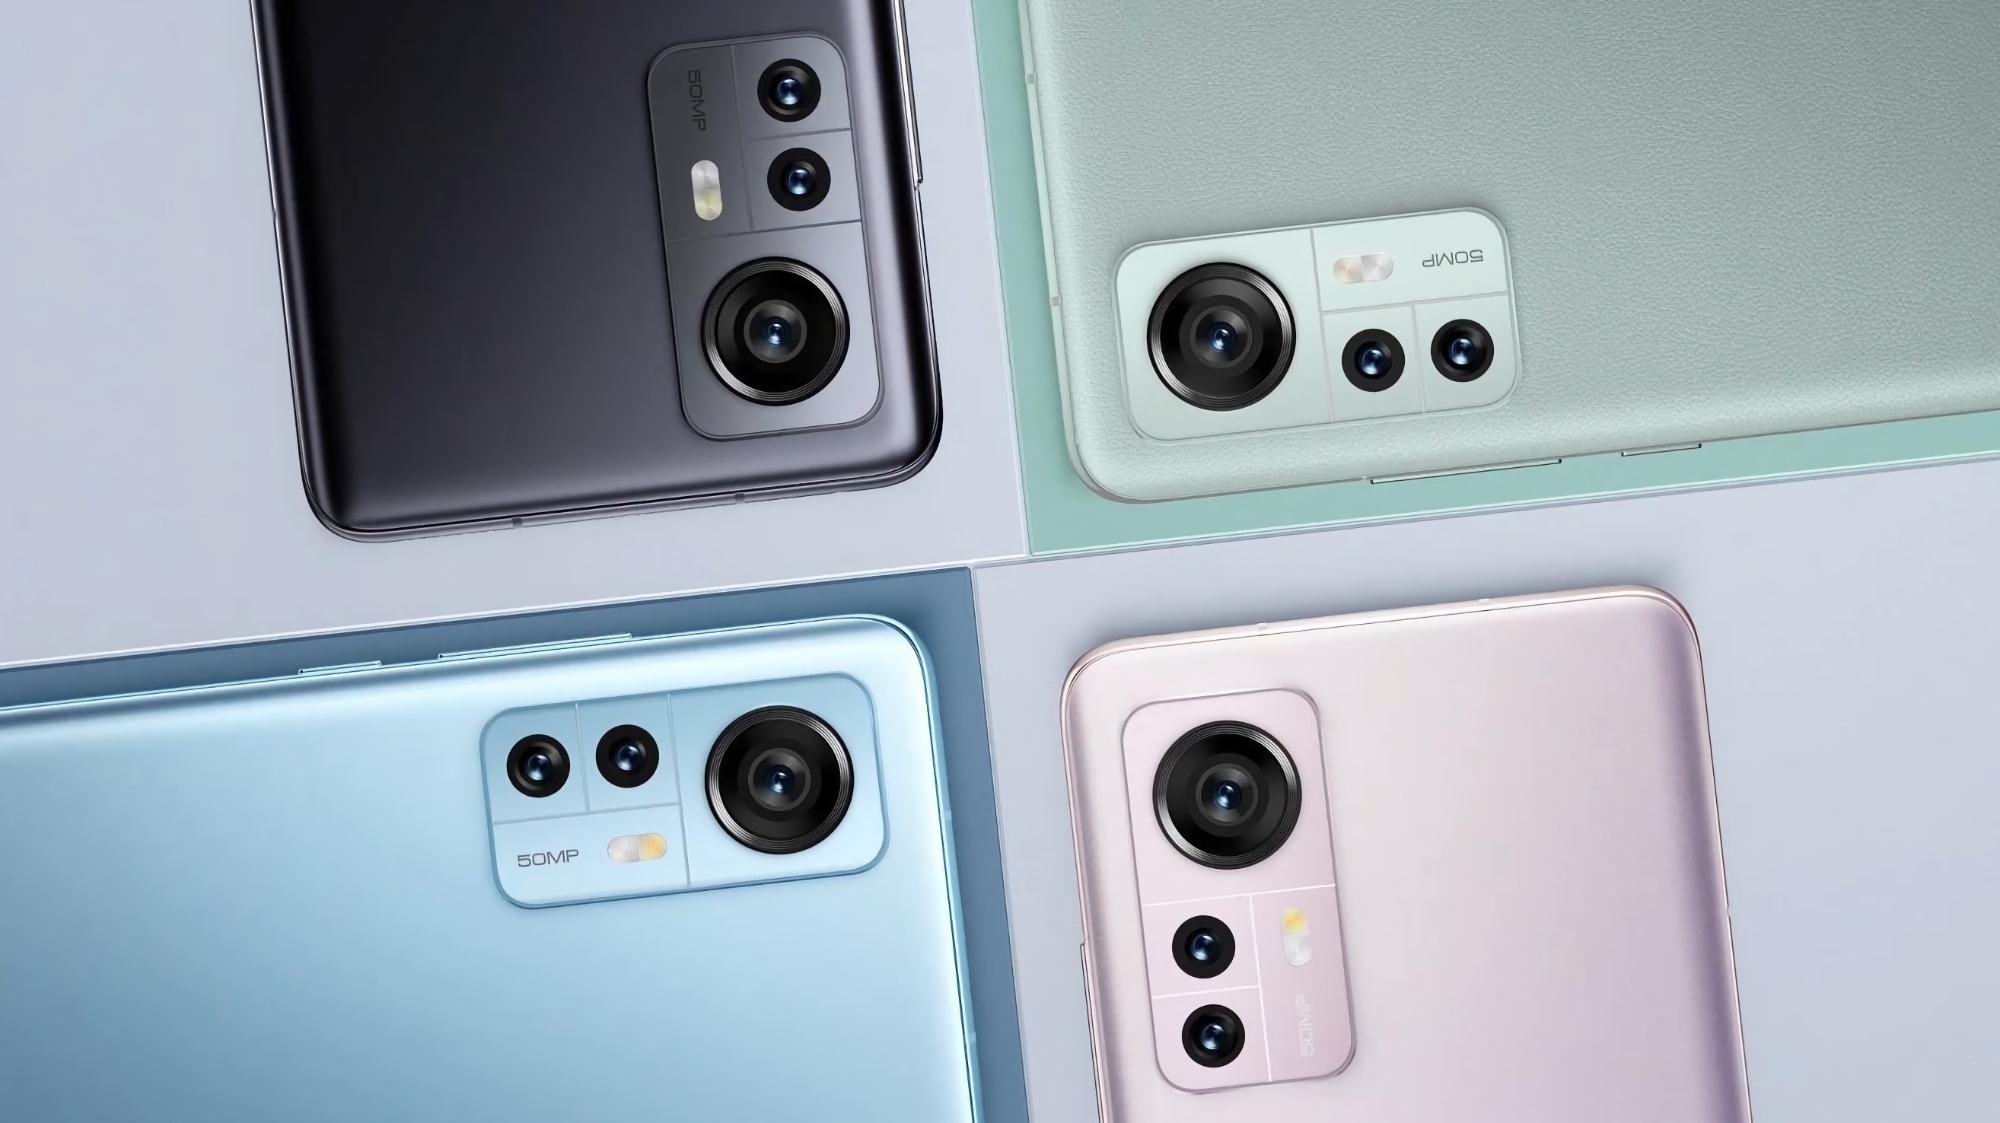 Xiaomi 12S and Xiaomi 12S Pro - Xiaomi 12S Ultra, 12S Pro, 12S Launched with Snapdragon 8+ Gen 1 SoC